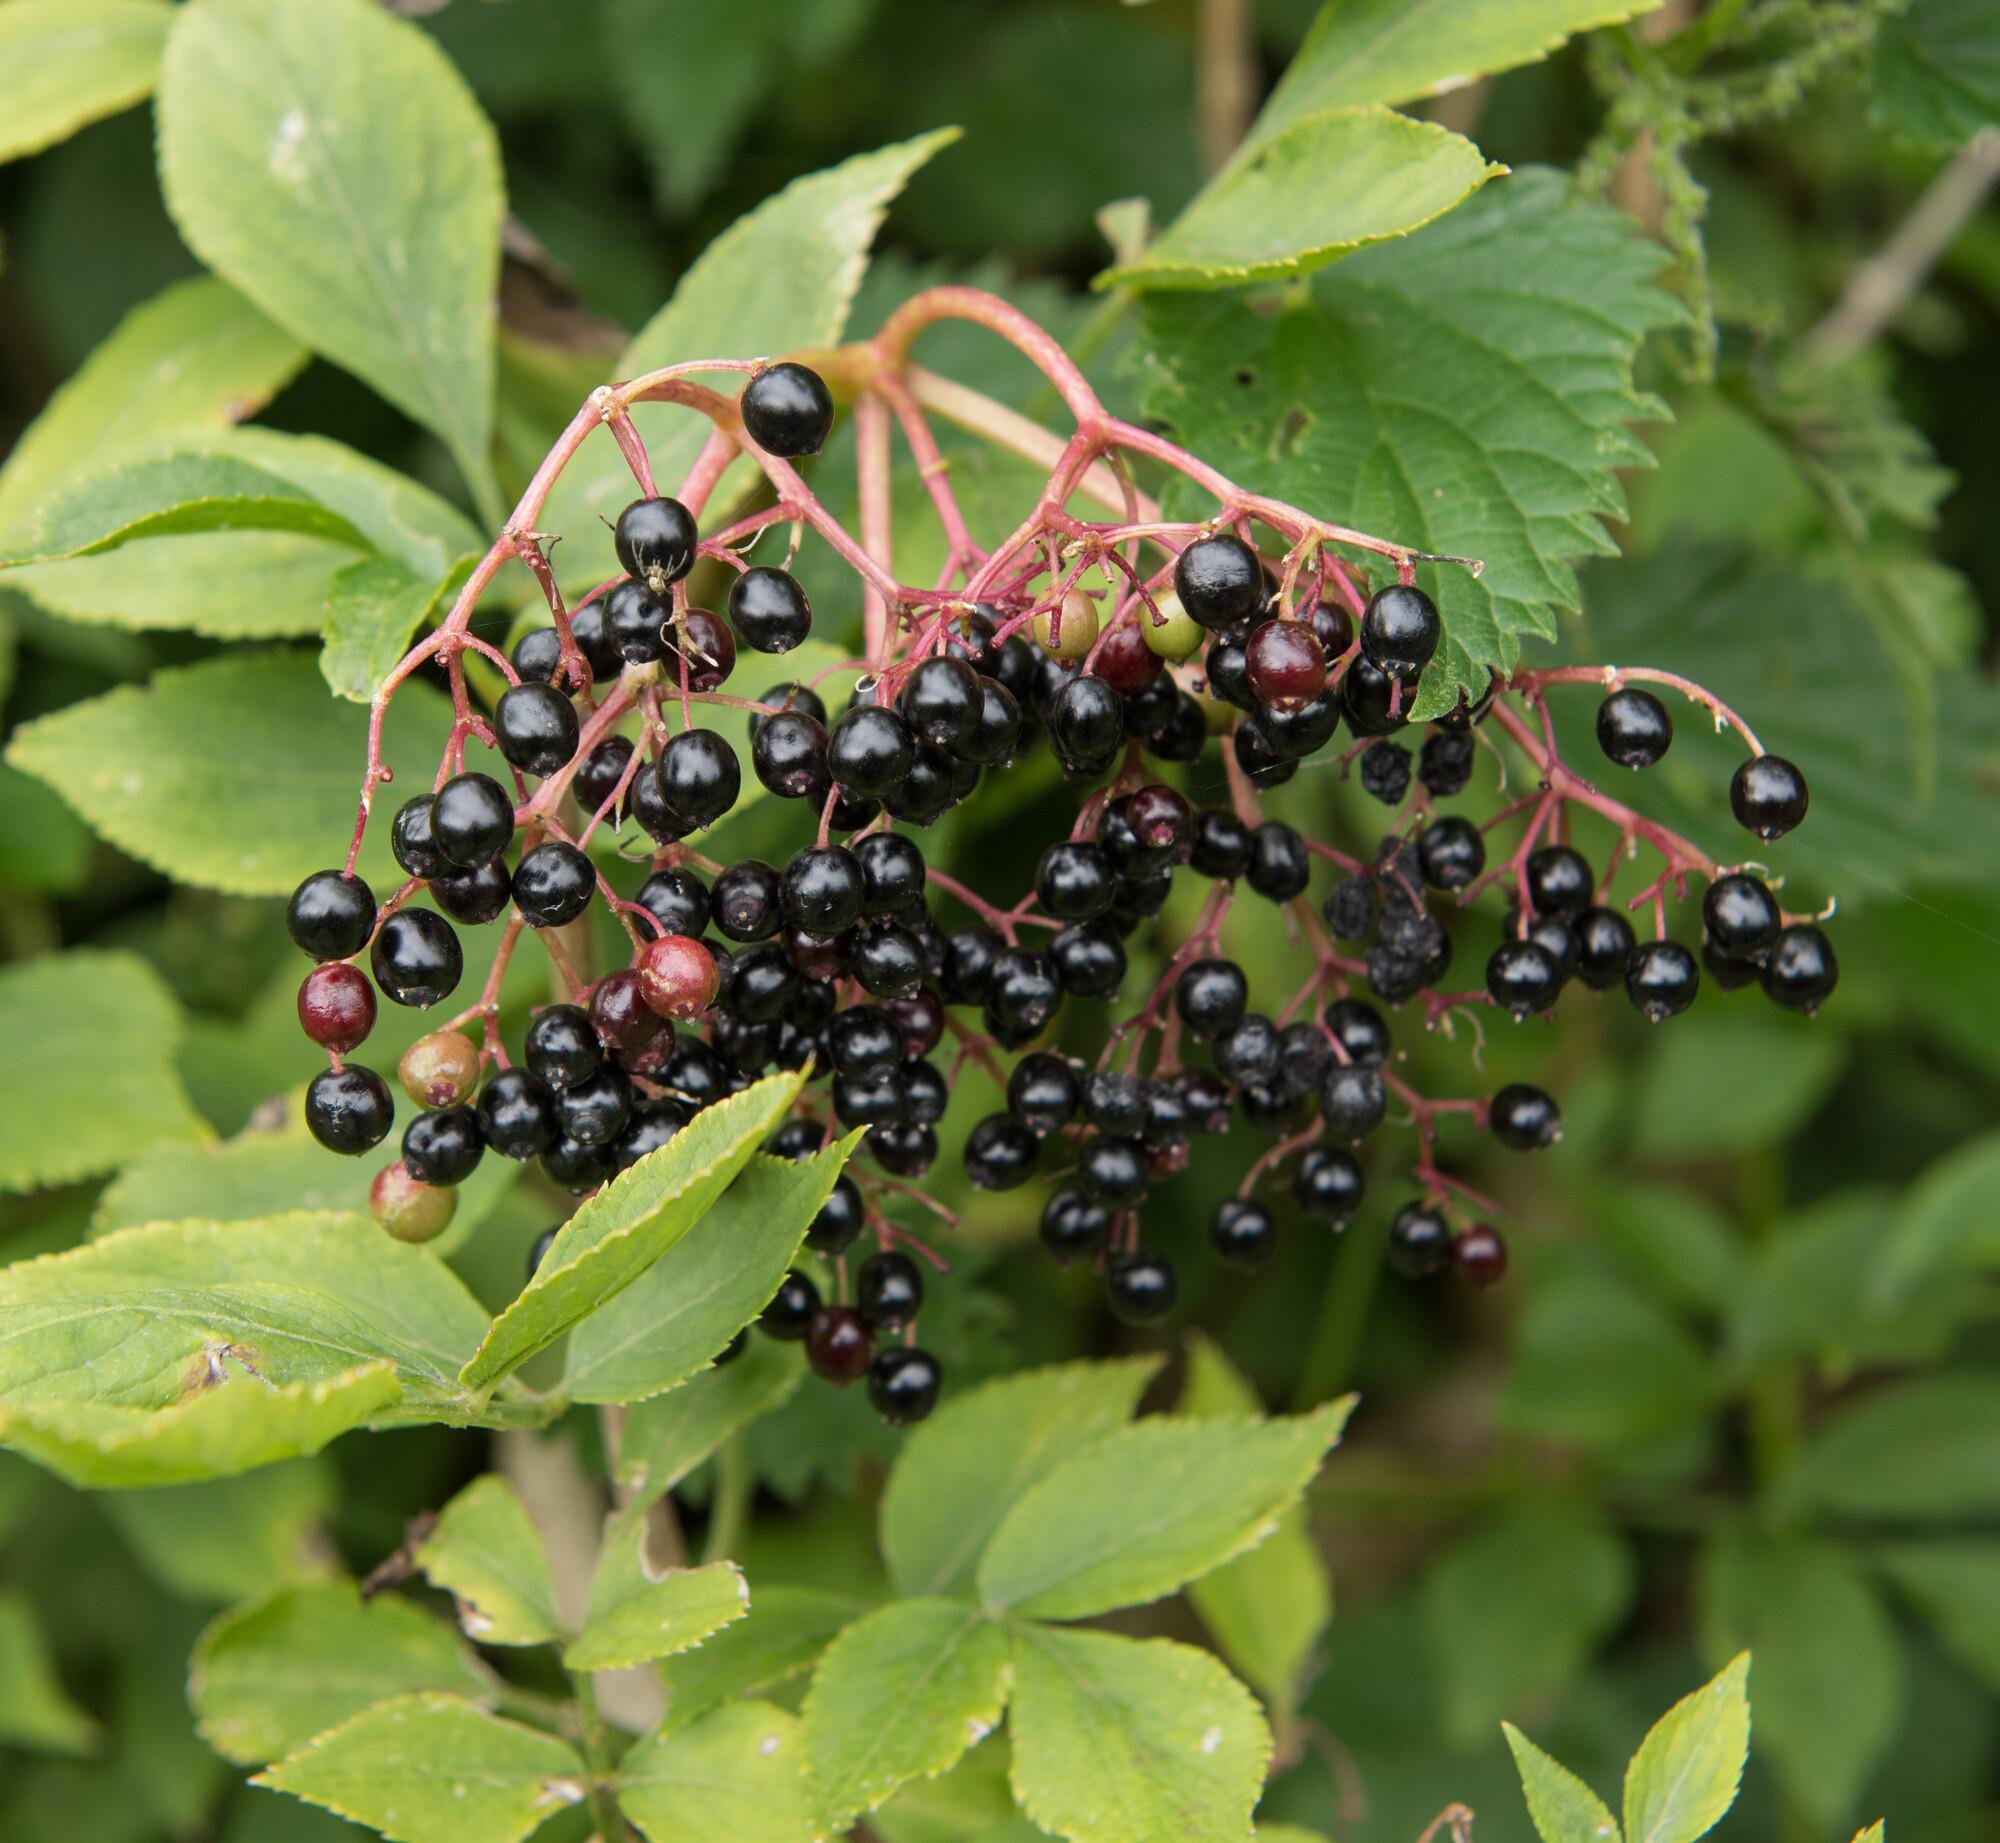 Close up of small, round, elderberries amongst green leaves.